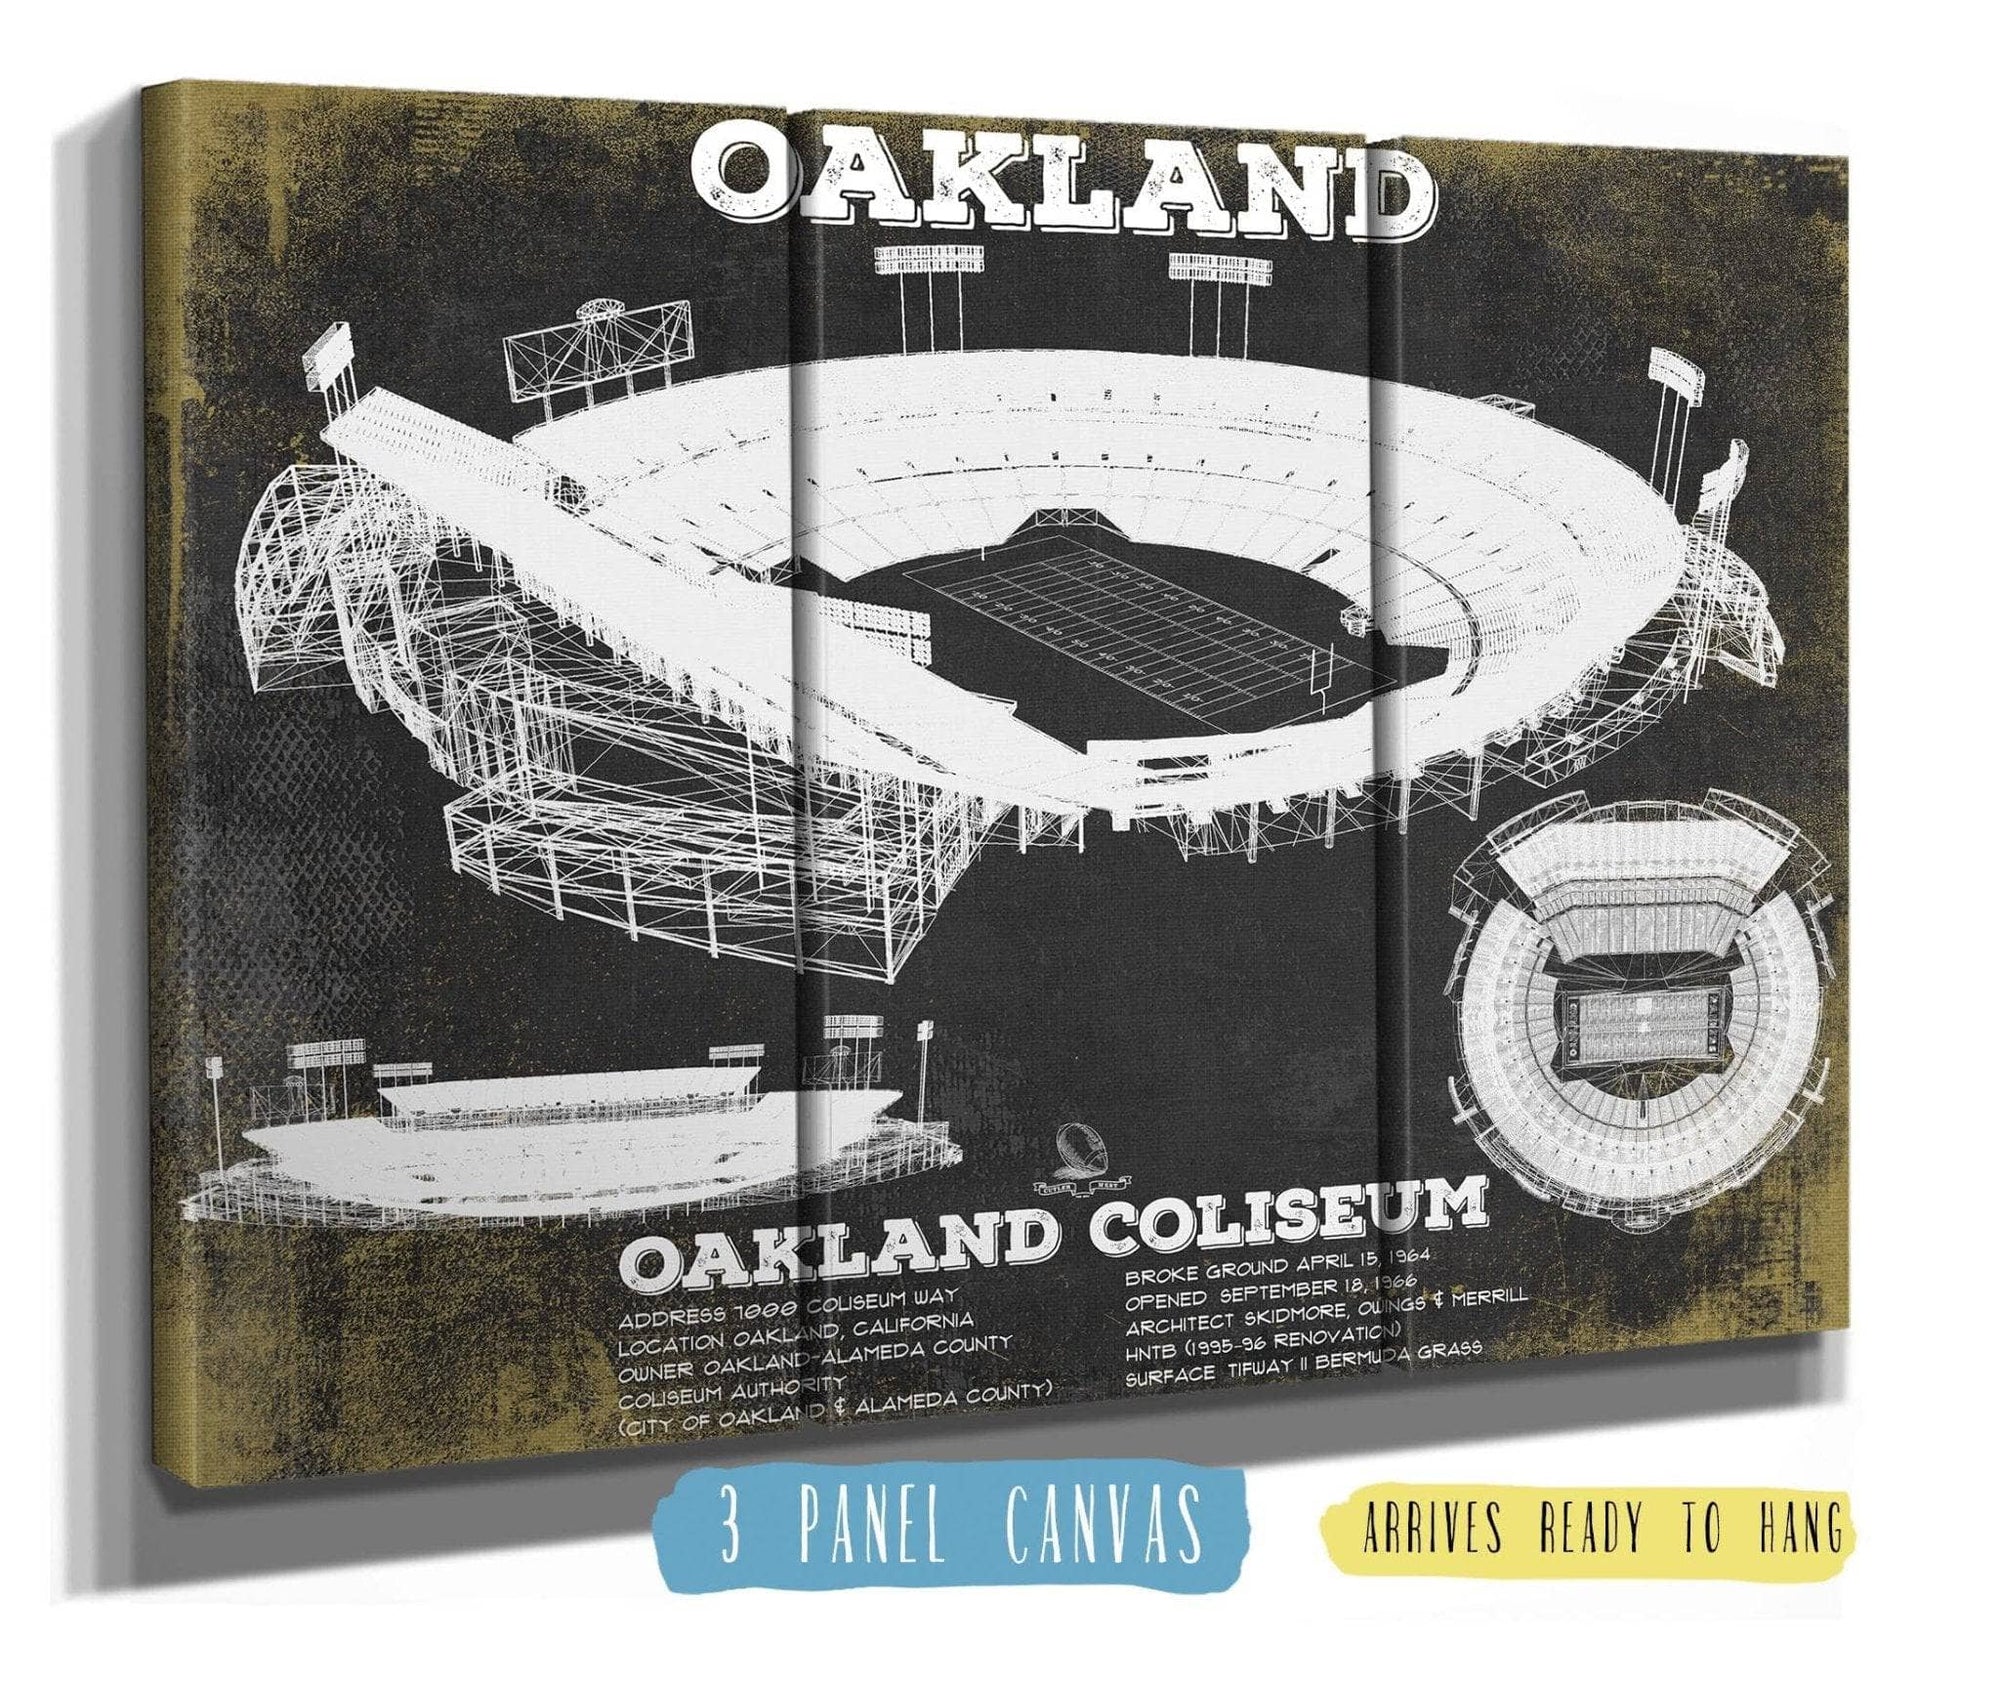 Cutler West Pro Football Collection 48" x 32" / 3 Panel Canvas Wrap Oakland Raiders Team Color Alameda County Coliseum Seating Chart - Vintage Football Print 920787395-TOP_70411